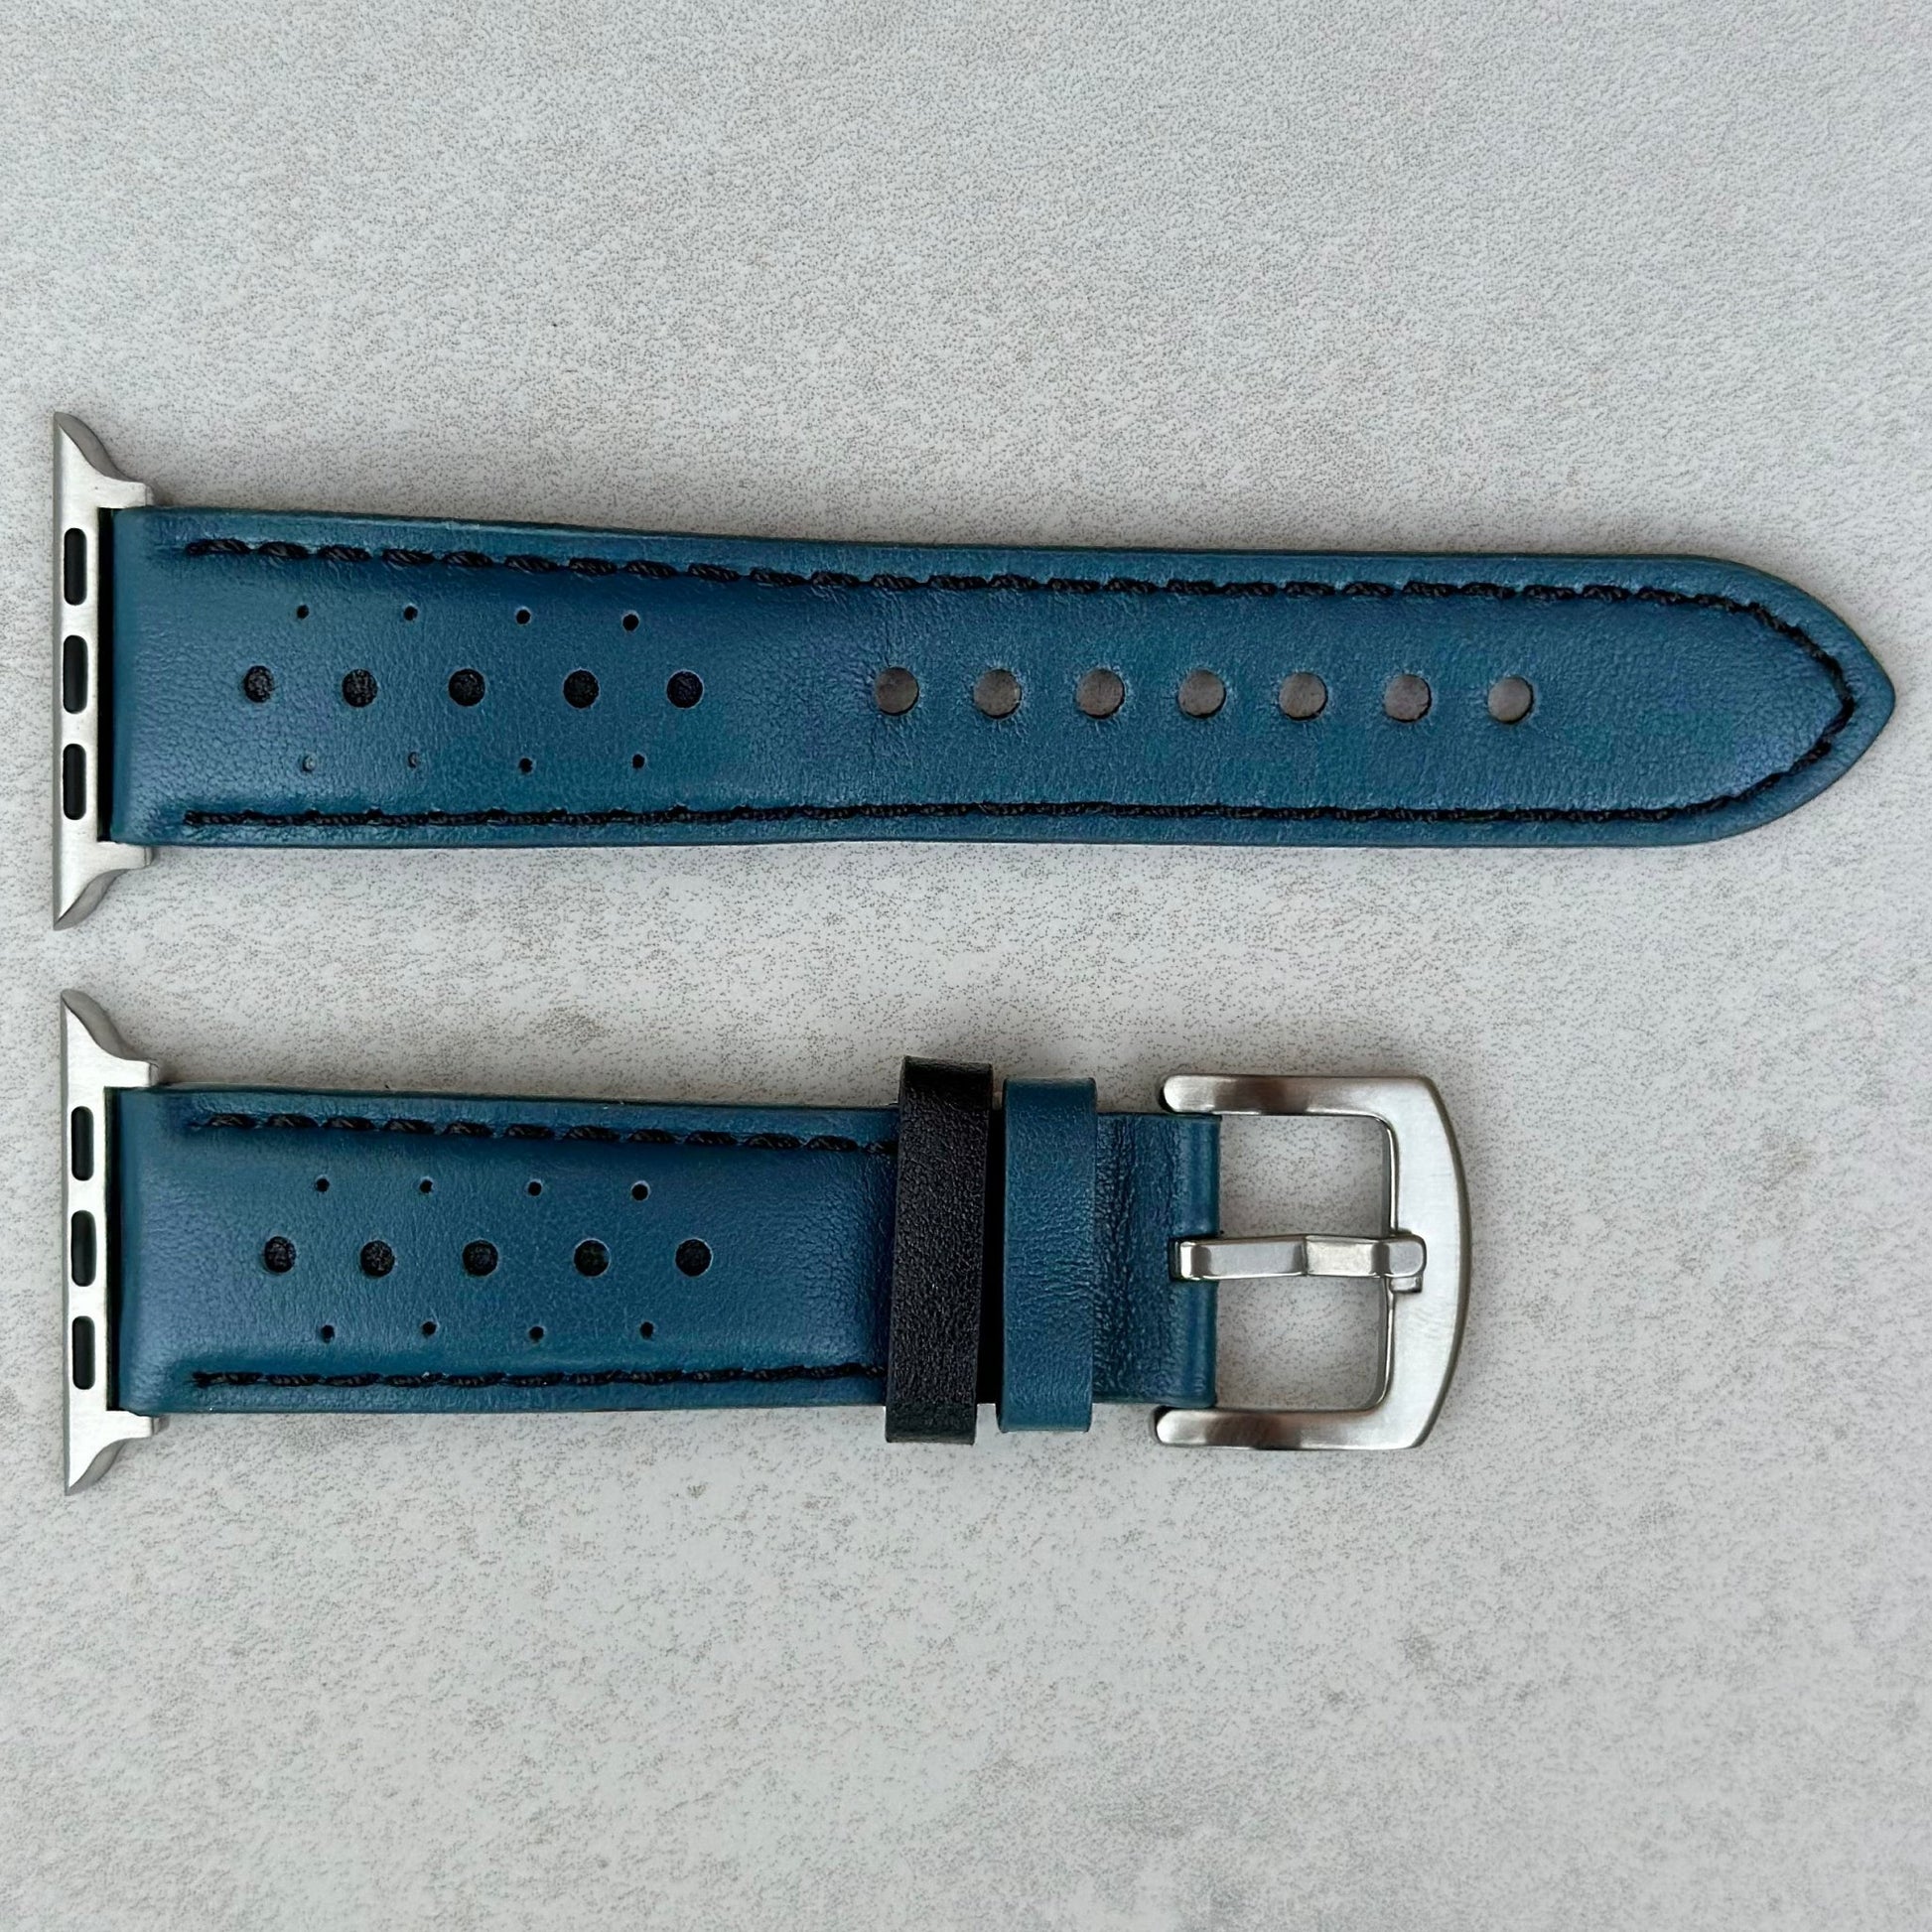 Le Mans petrol blue and black full grain leather apple watch strap. Racing watch strap. 316L stainless steel hardware.